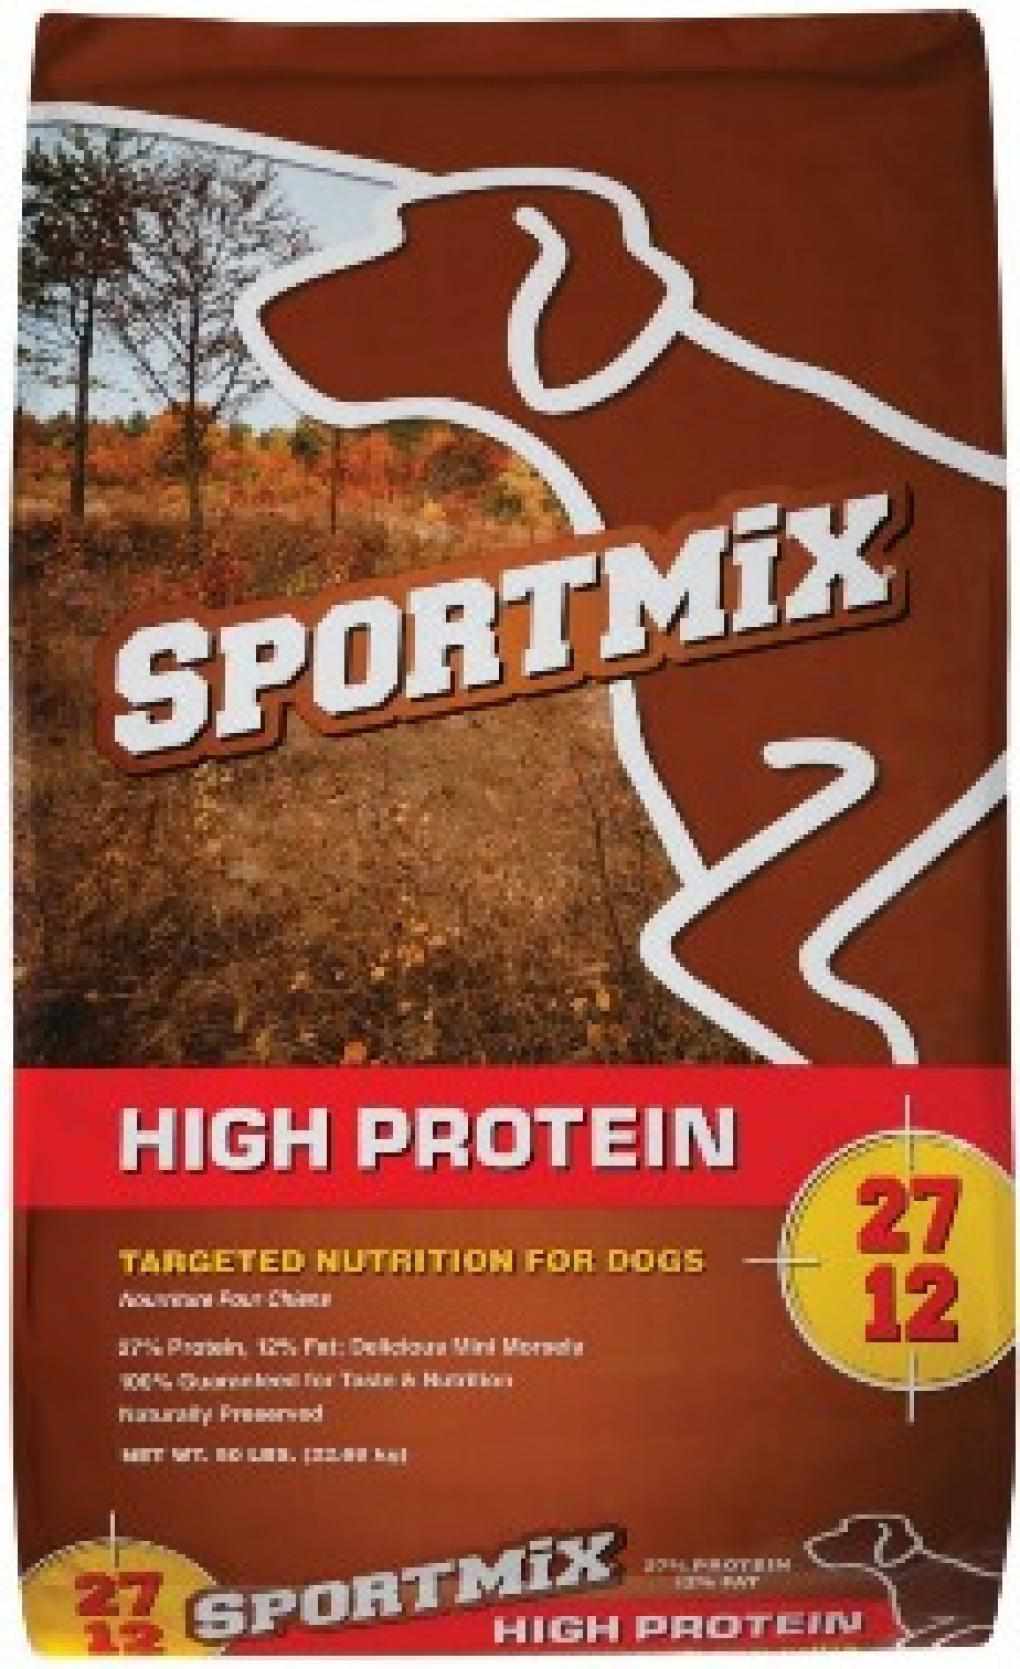 Sportmix High Protein Dog Food label